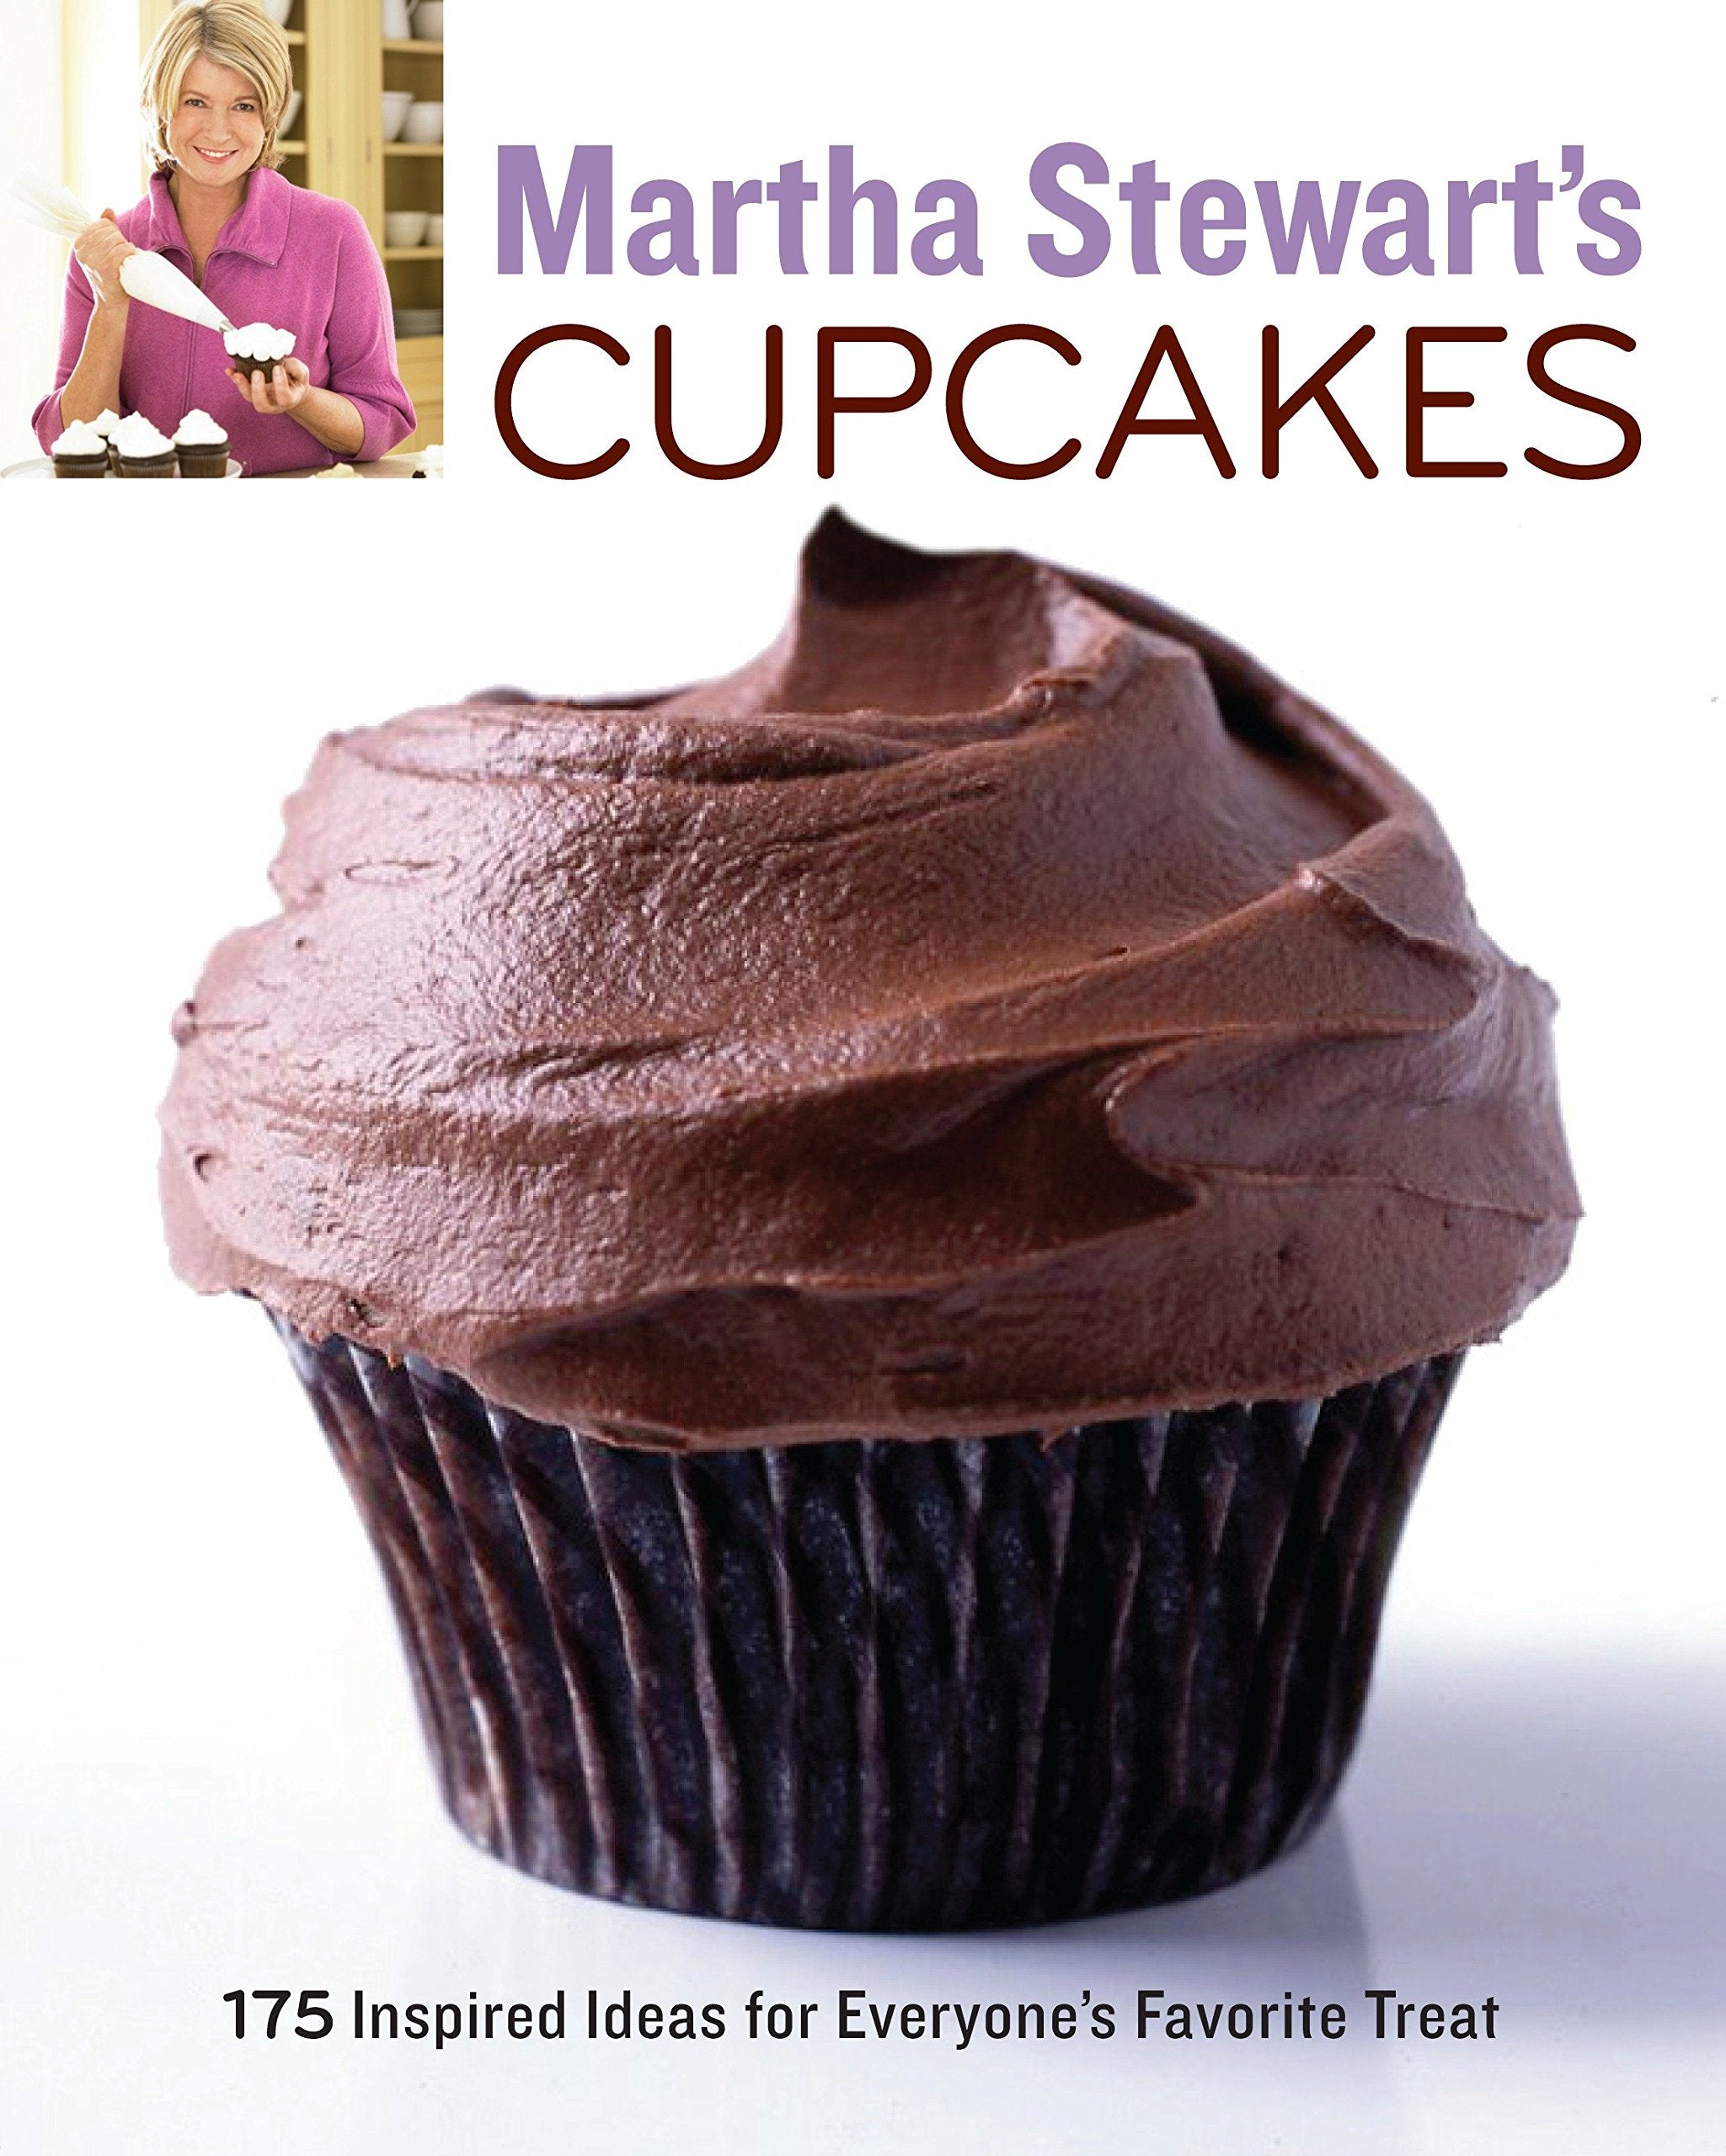 Martha Stewart's Cupcakes: 175 Inspired Ideas for Everyone's Favorite Treat  (Editors of Martha Stewart Living) *Signed*